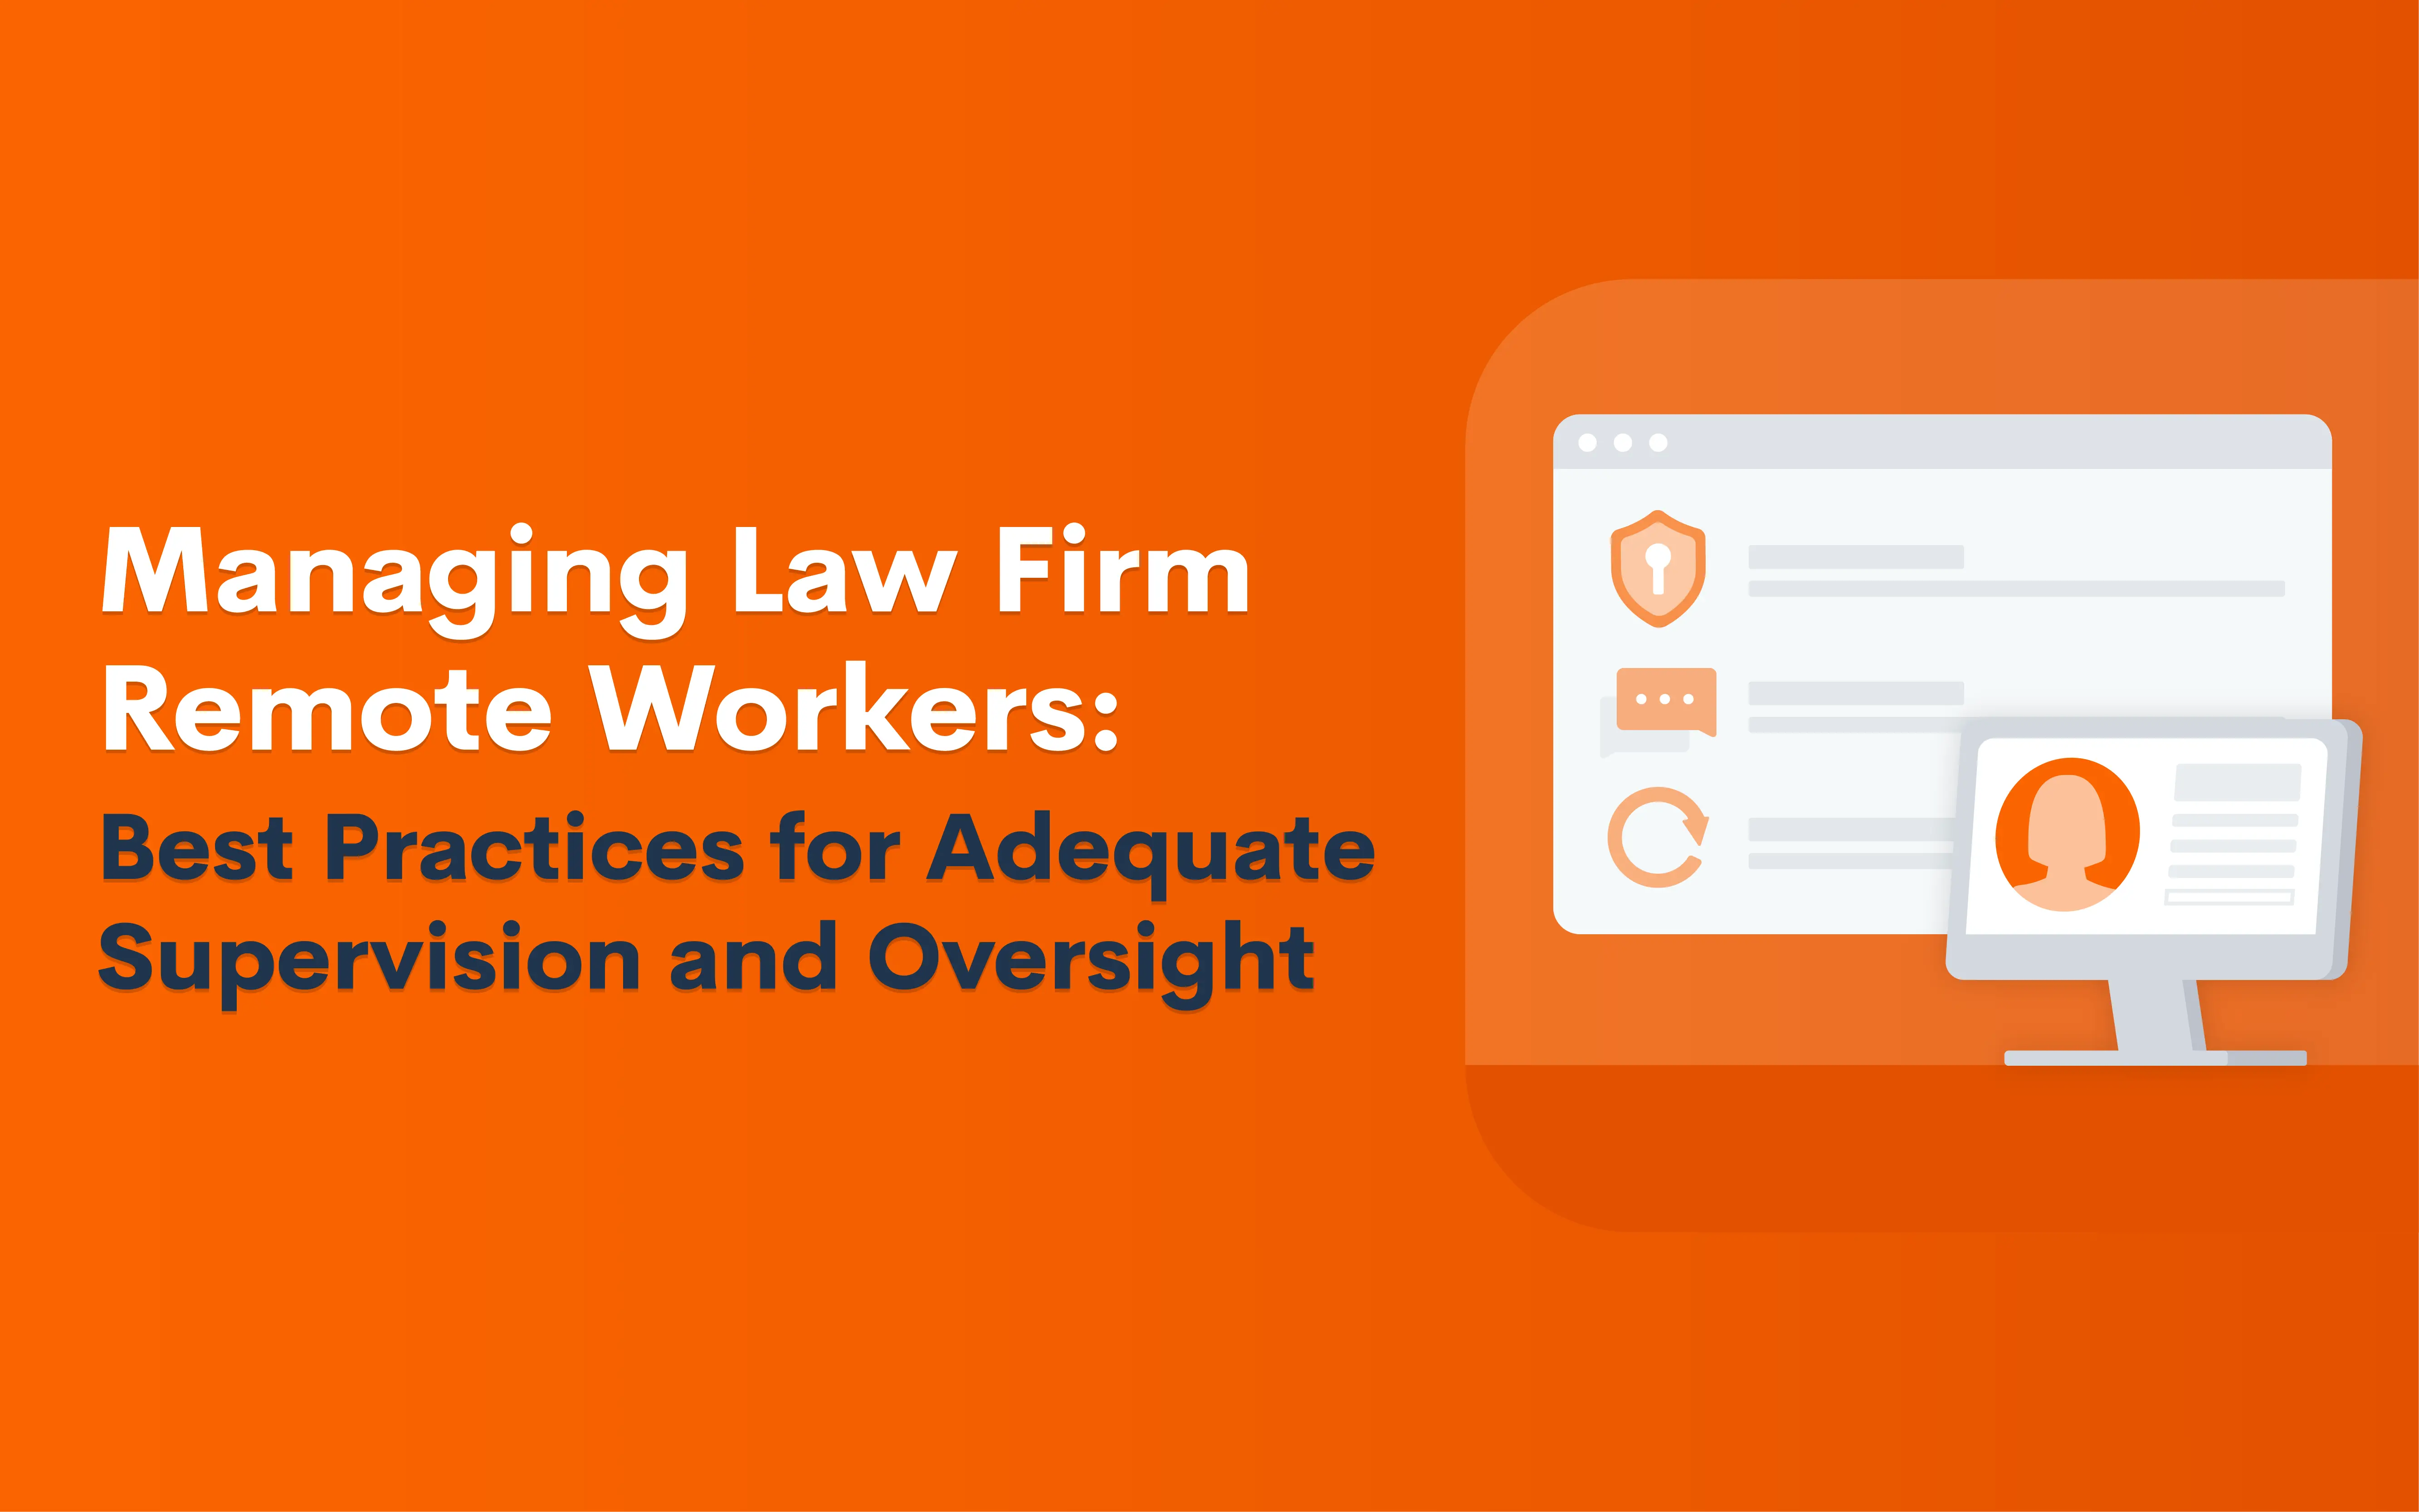 Managing-Law-Firm-Remote-Workers-Best-Practices-for-Adequate-Supervision-and-Oversight_BLOG_01